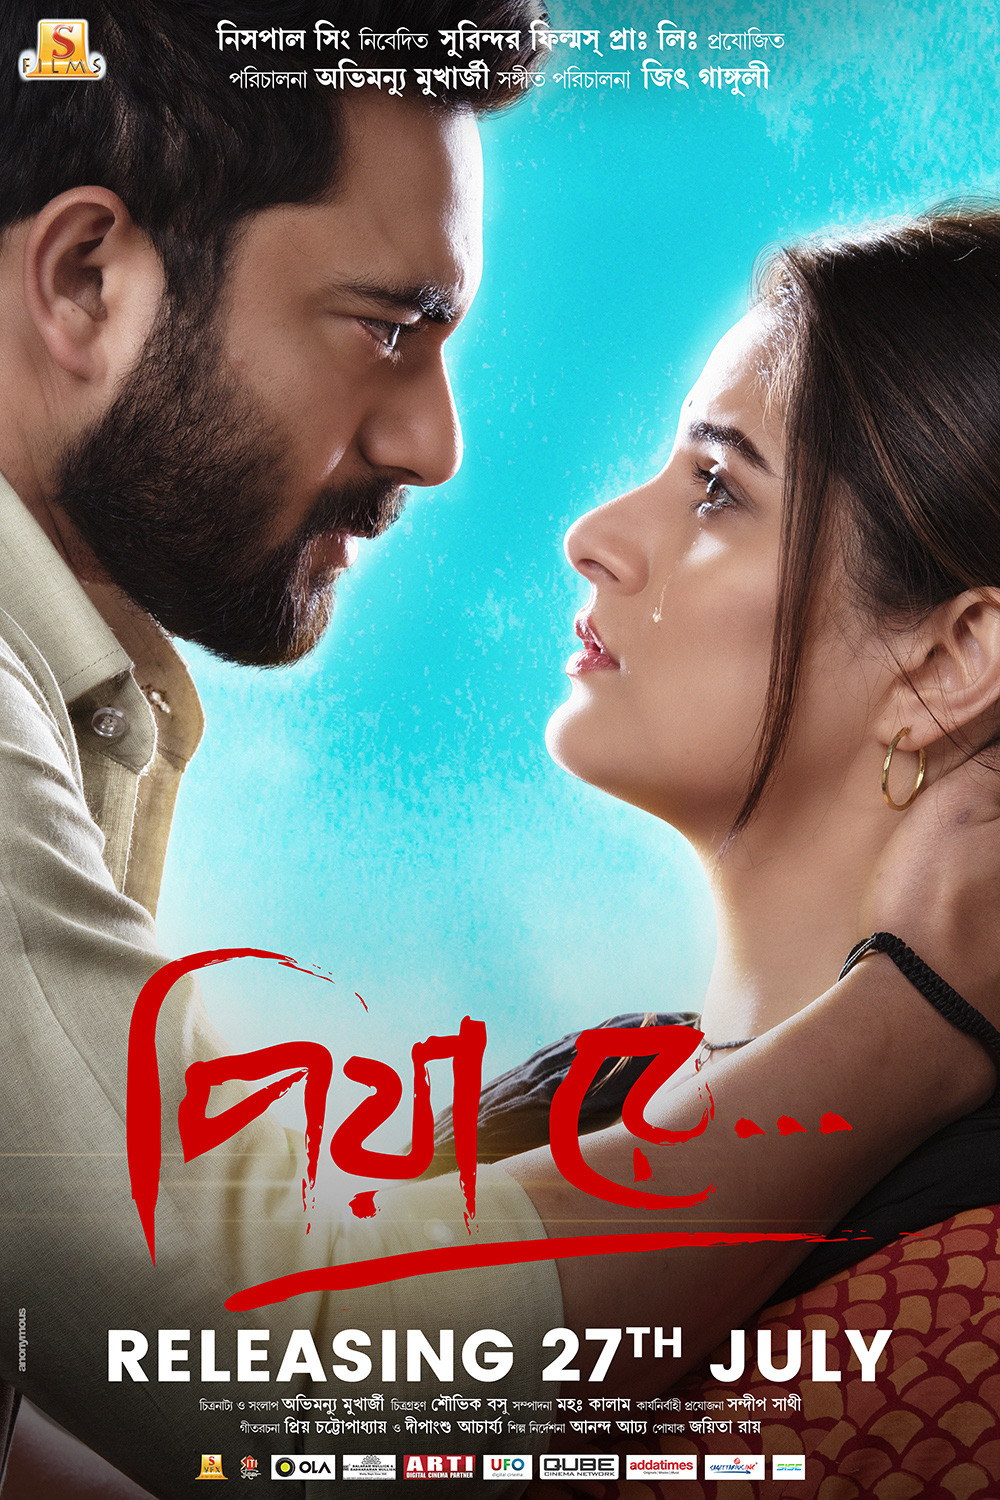 Extra Large Movie Poster Image for Piya Re (#3 of 4)